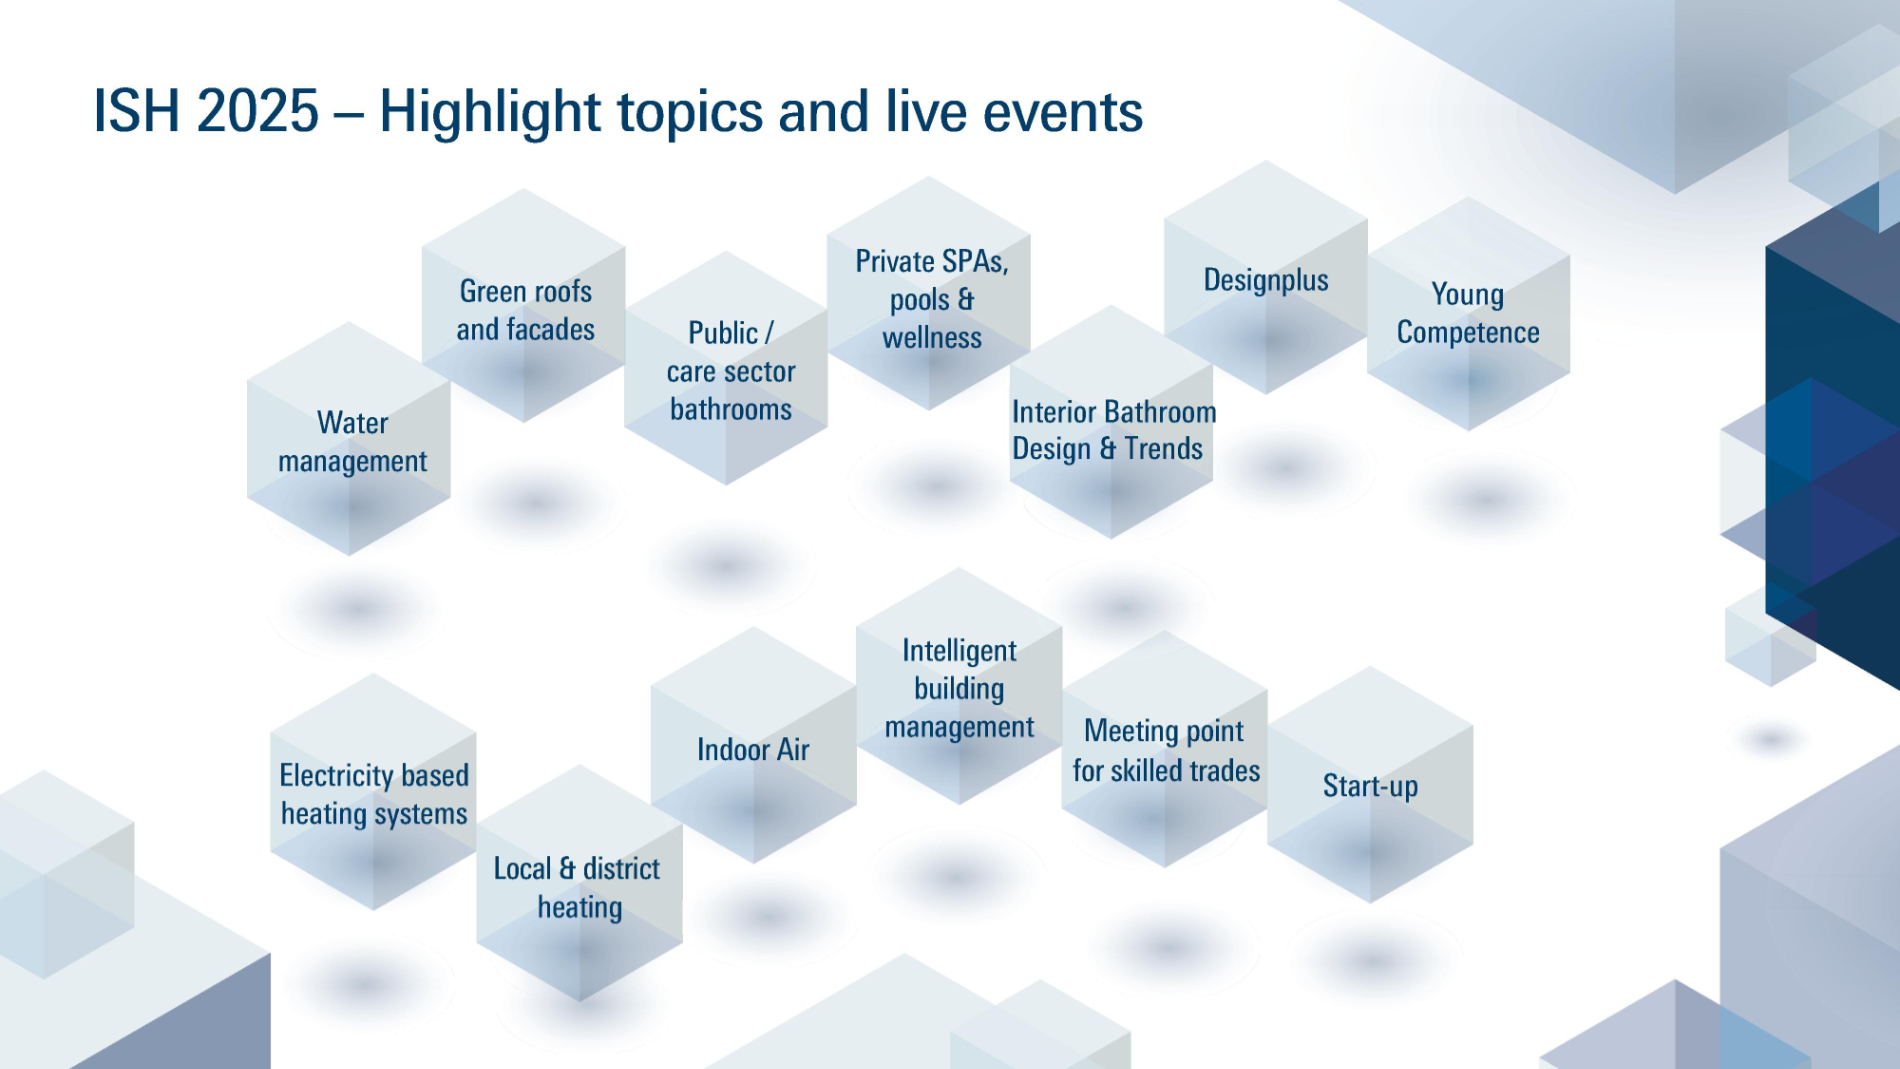 Graphic: Highlight topics and live events